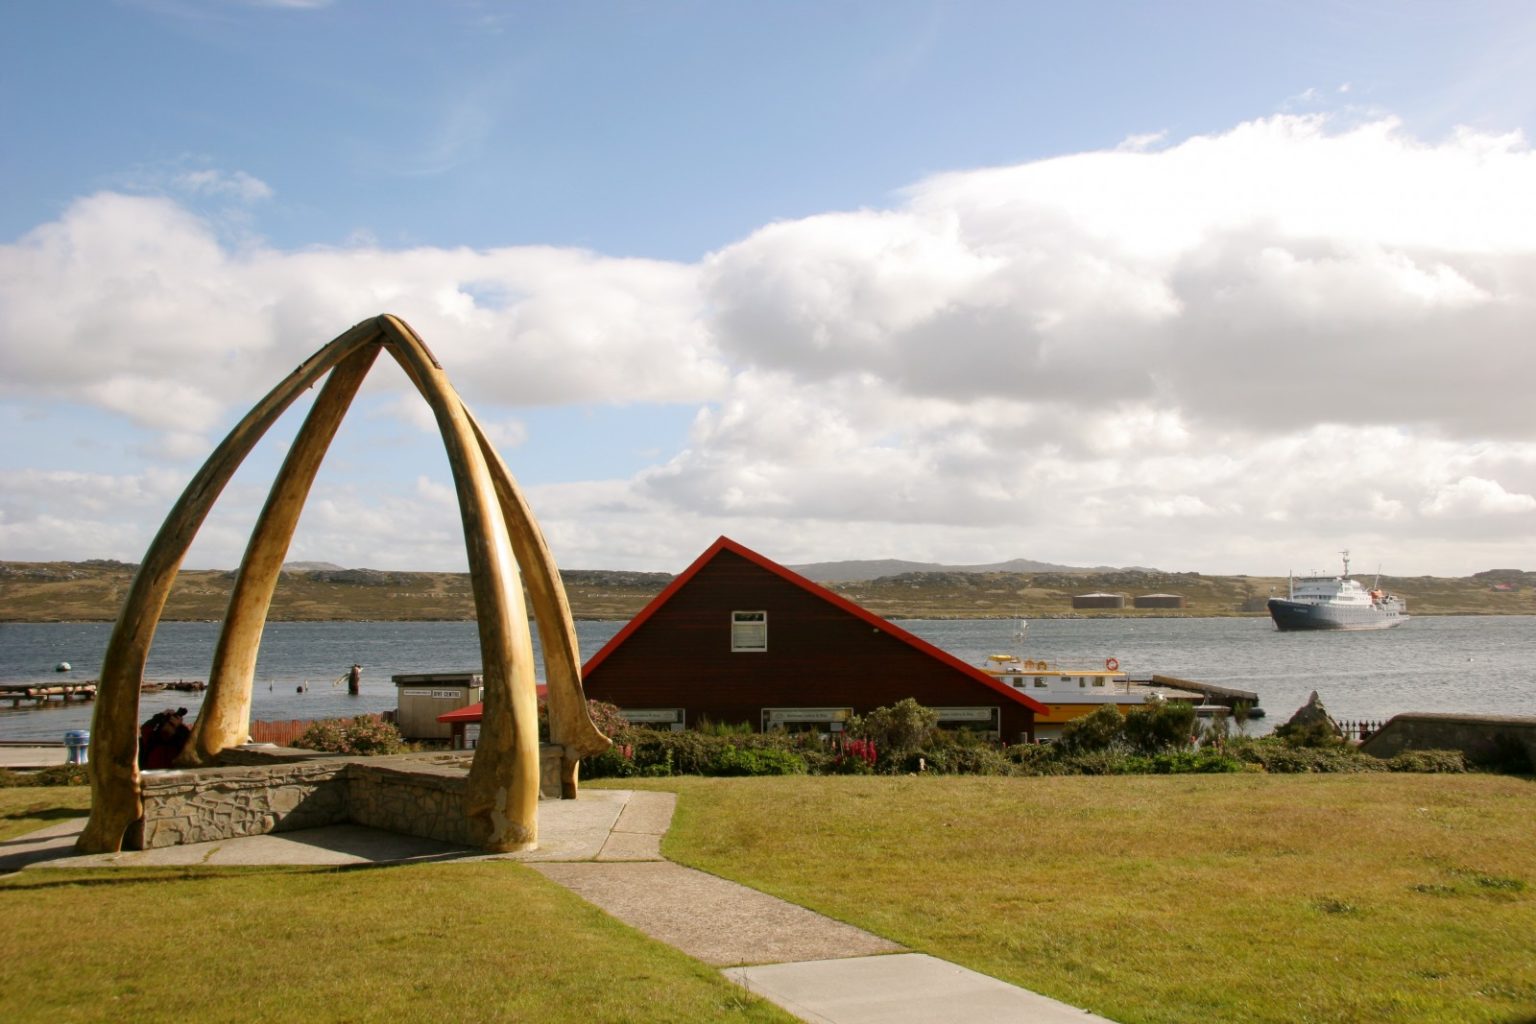 Whalebone Arch at the edge of the waters in Port Stanley on the Falkland Islands